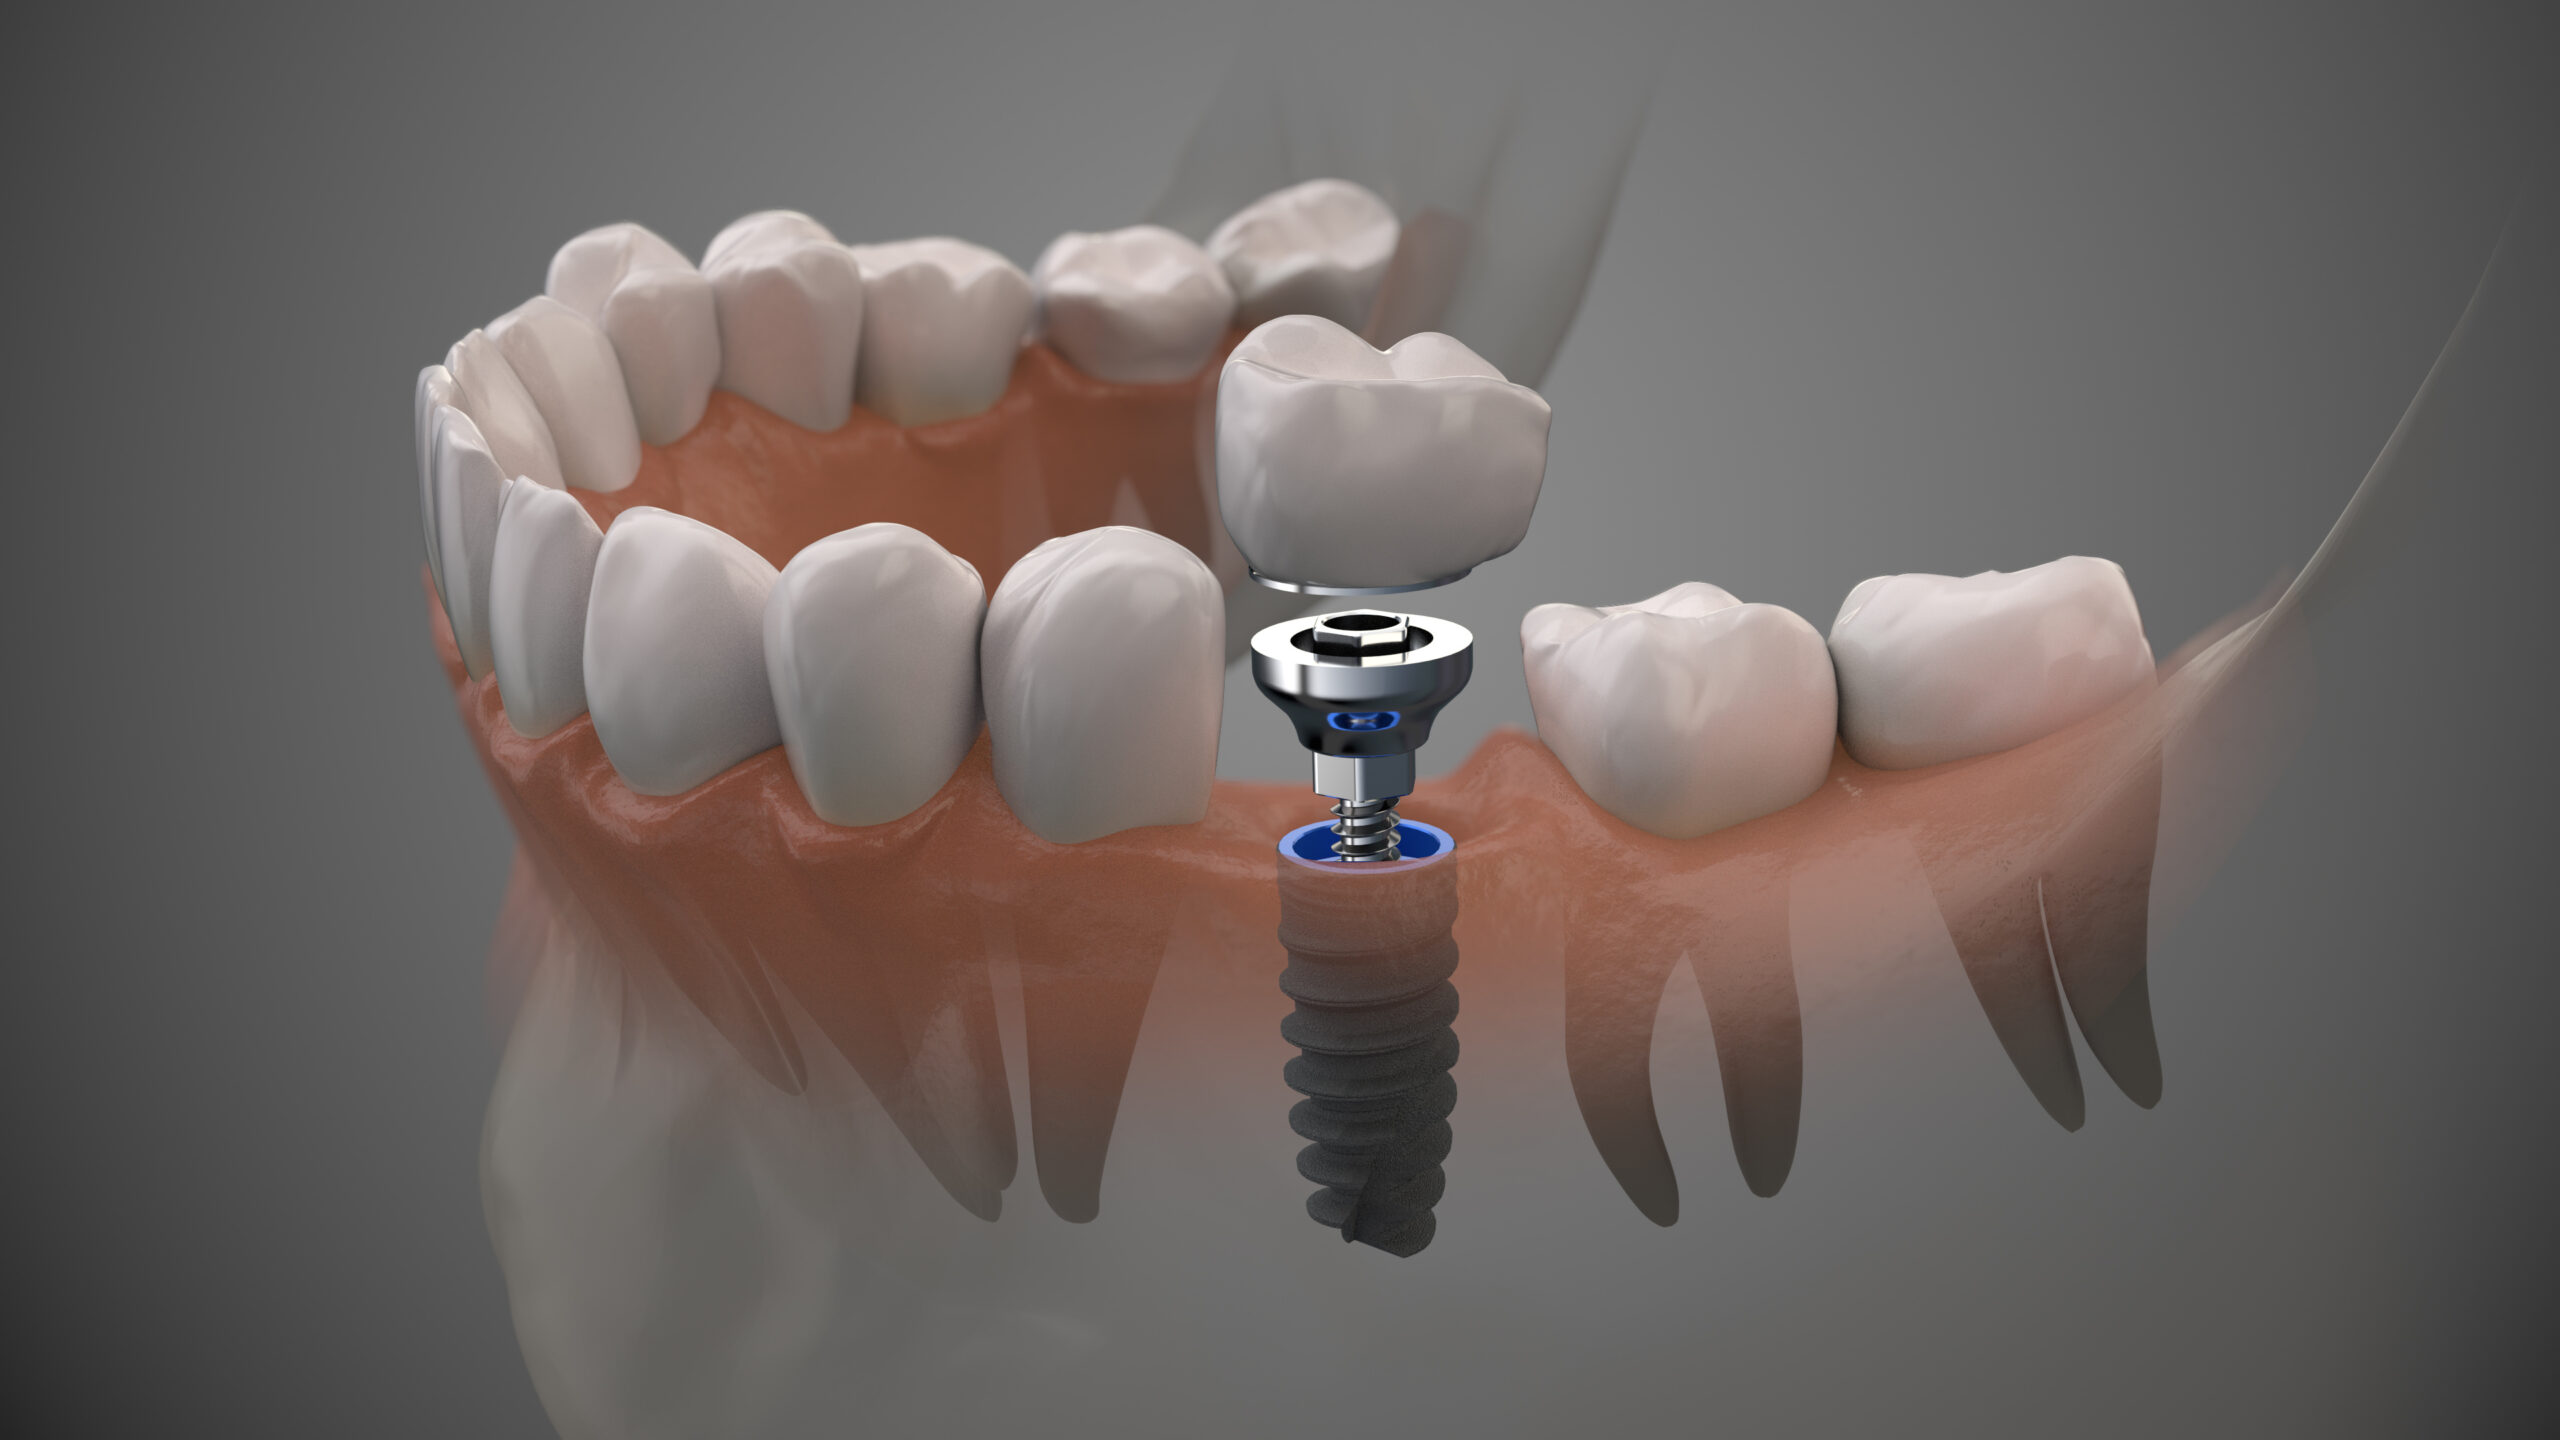 Computer-Generated Graphic of Human Lower Jaw with Transparent Gums Showing Teeth Down to Roots and Dental Implant